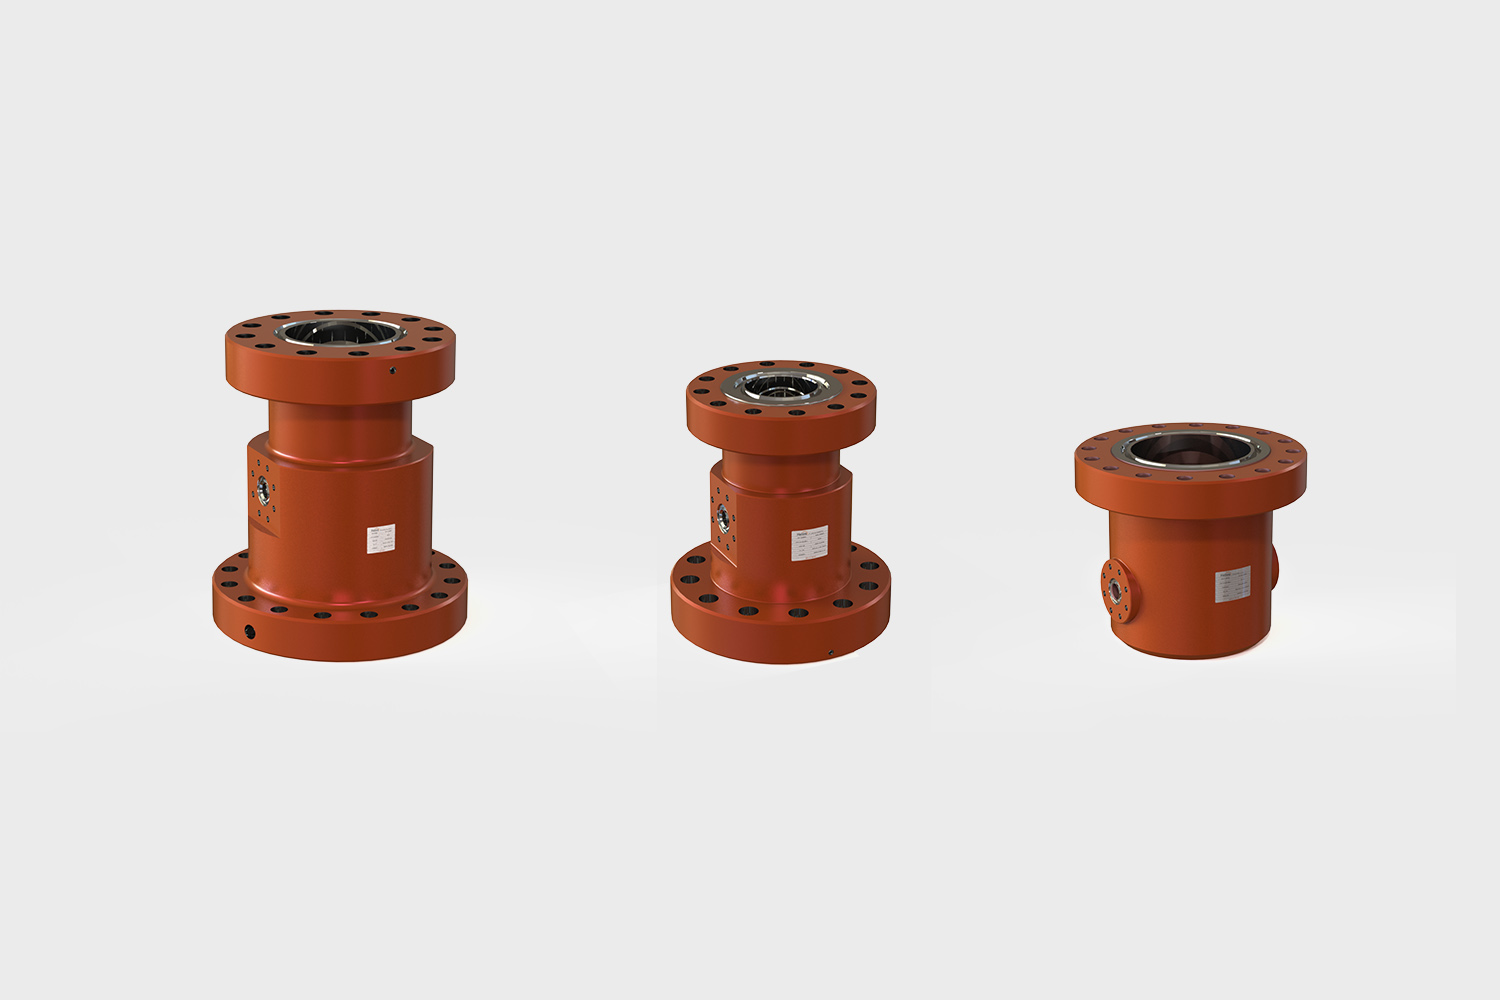 Casing Heads, Casing Spools and Tubing Spools